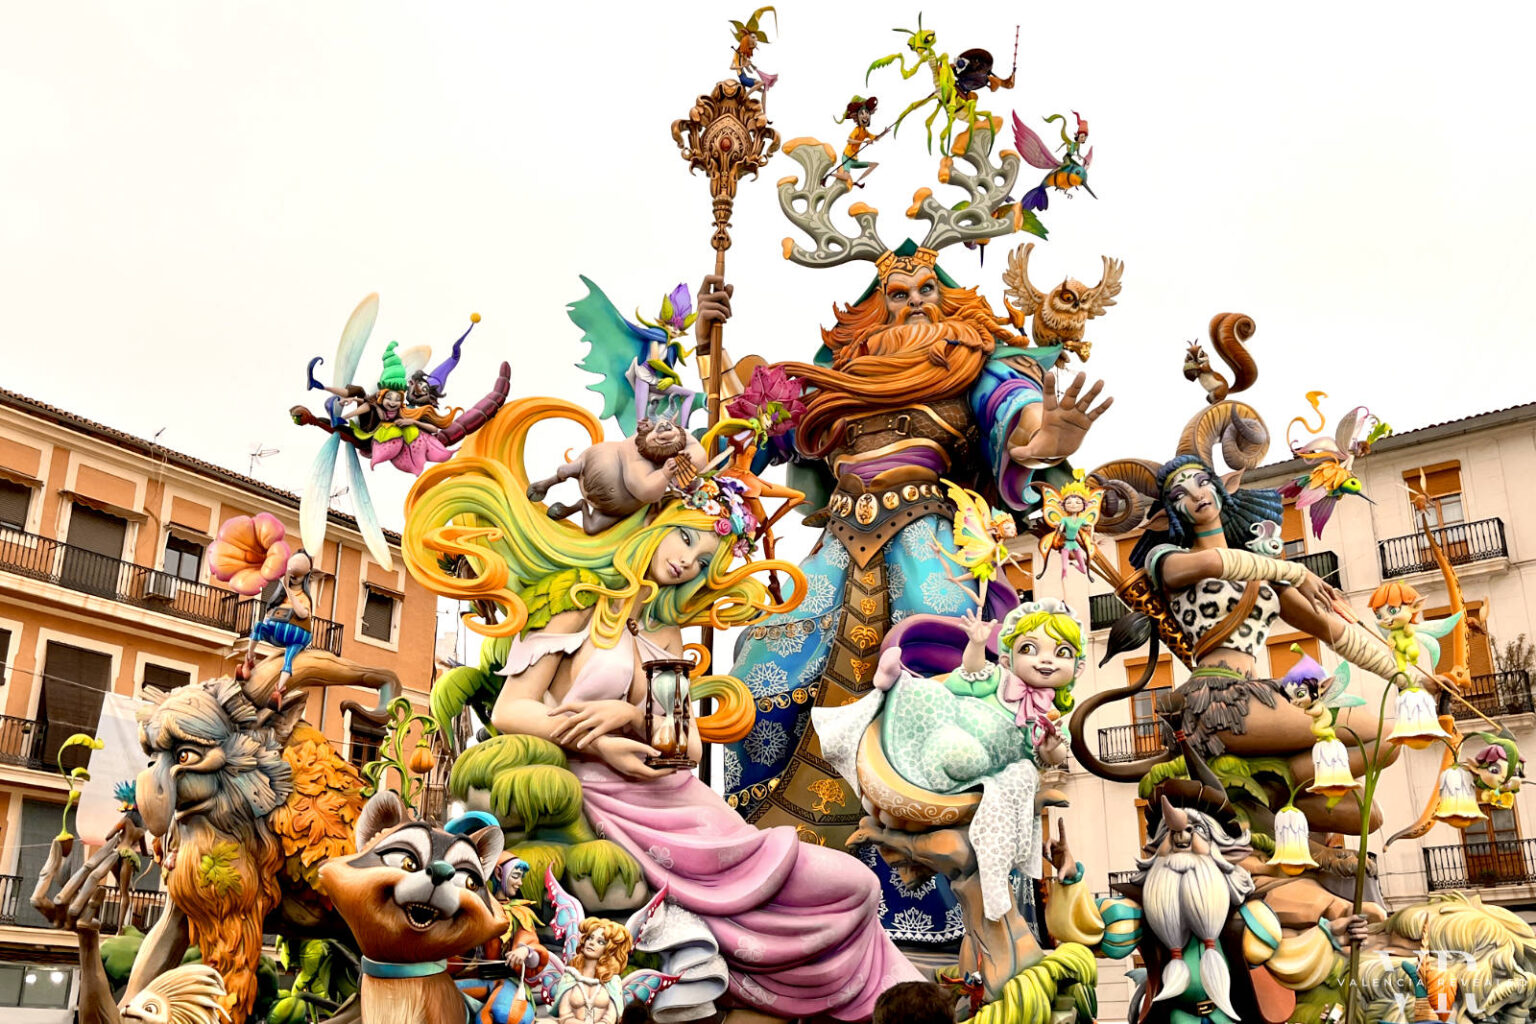 11 Las Fallas Facts to Know About Valencia’s Fire Festival